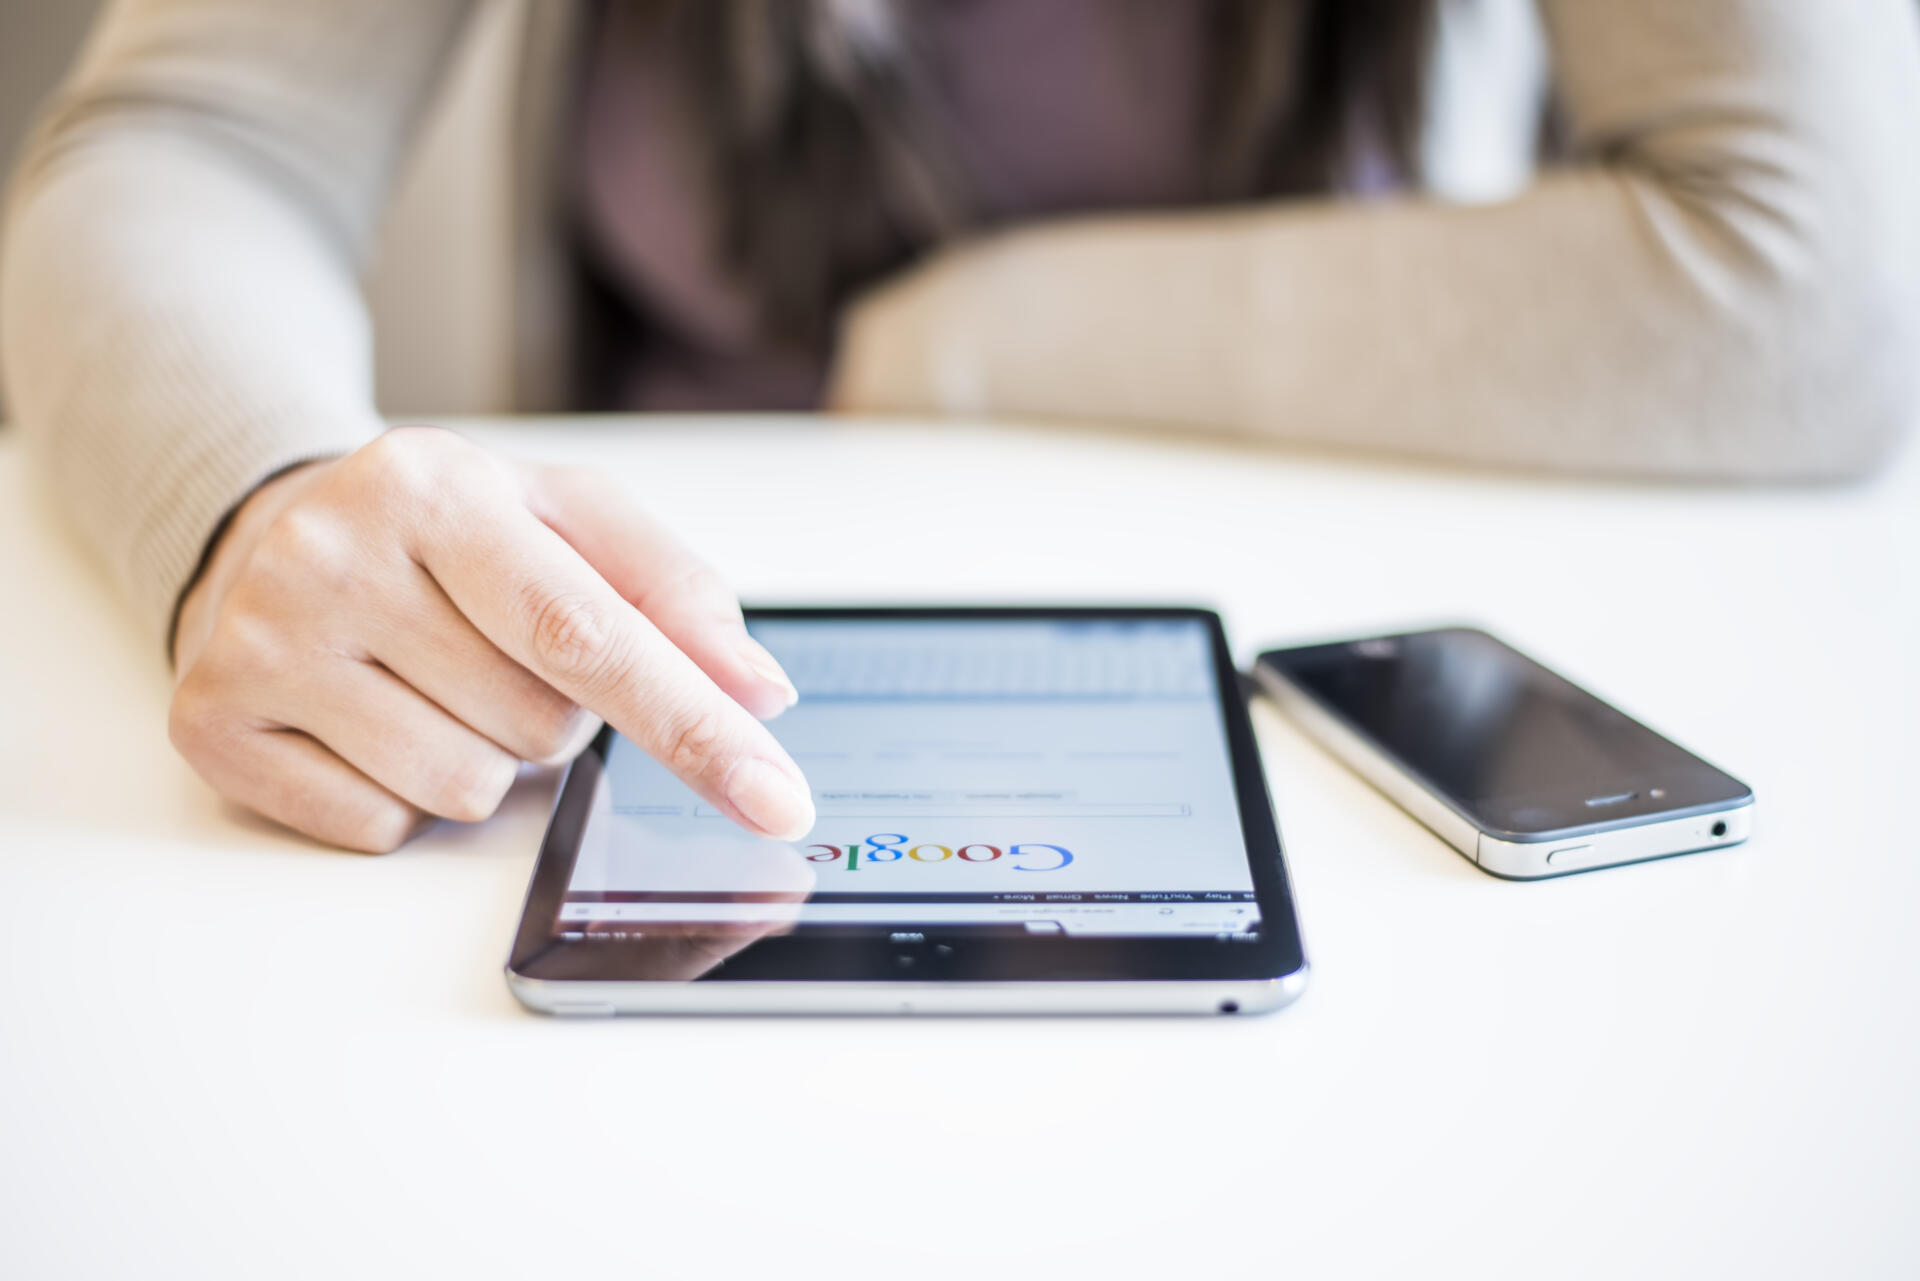 Novi Sad, Serbia - October 6, 2014: Woman's hands Googling on electronic device.Woman hands holding and touching on Apple iPad mini with Google search web page on a screen.